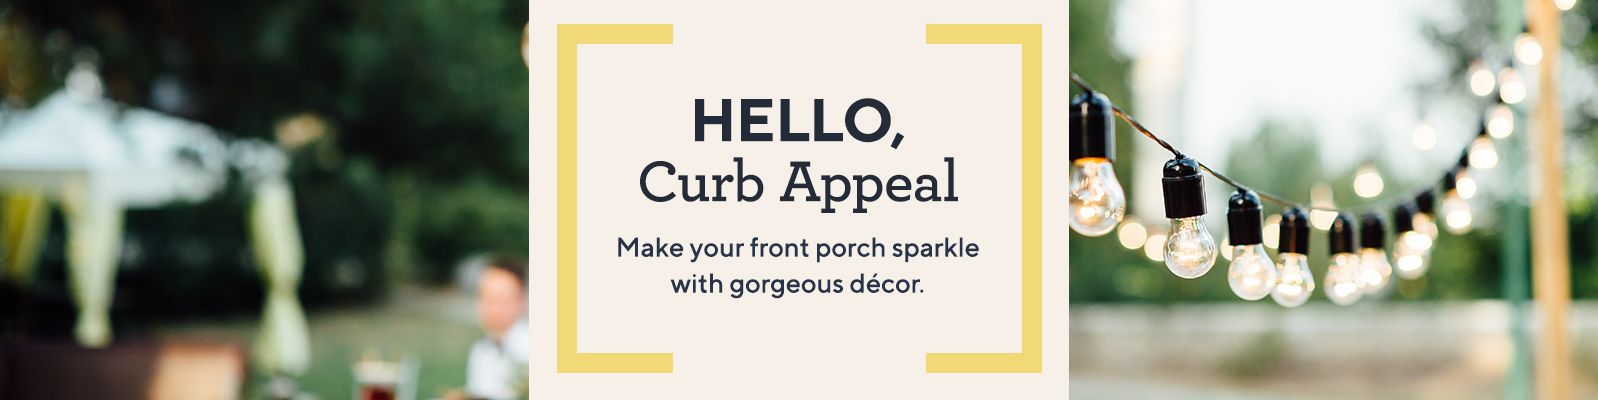 Hello, Curb Appeal Make your front porch sparkle with gorgeous décor. 